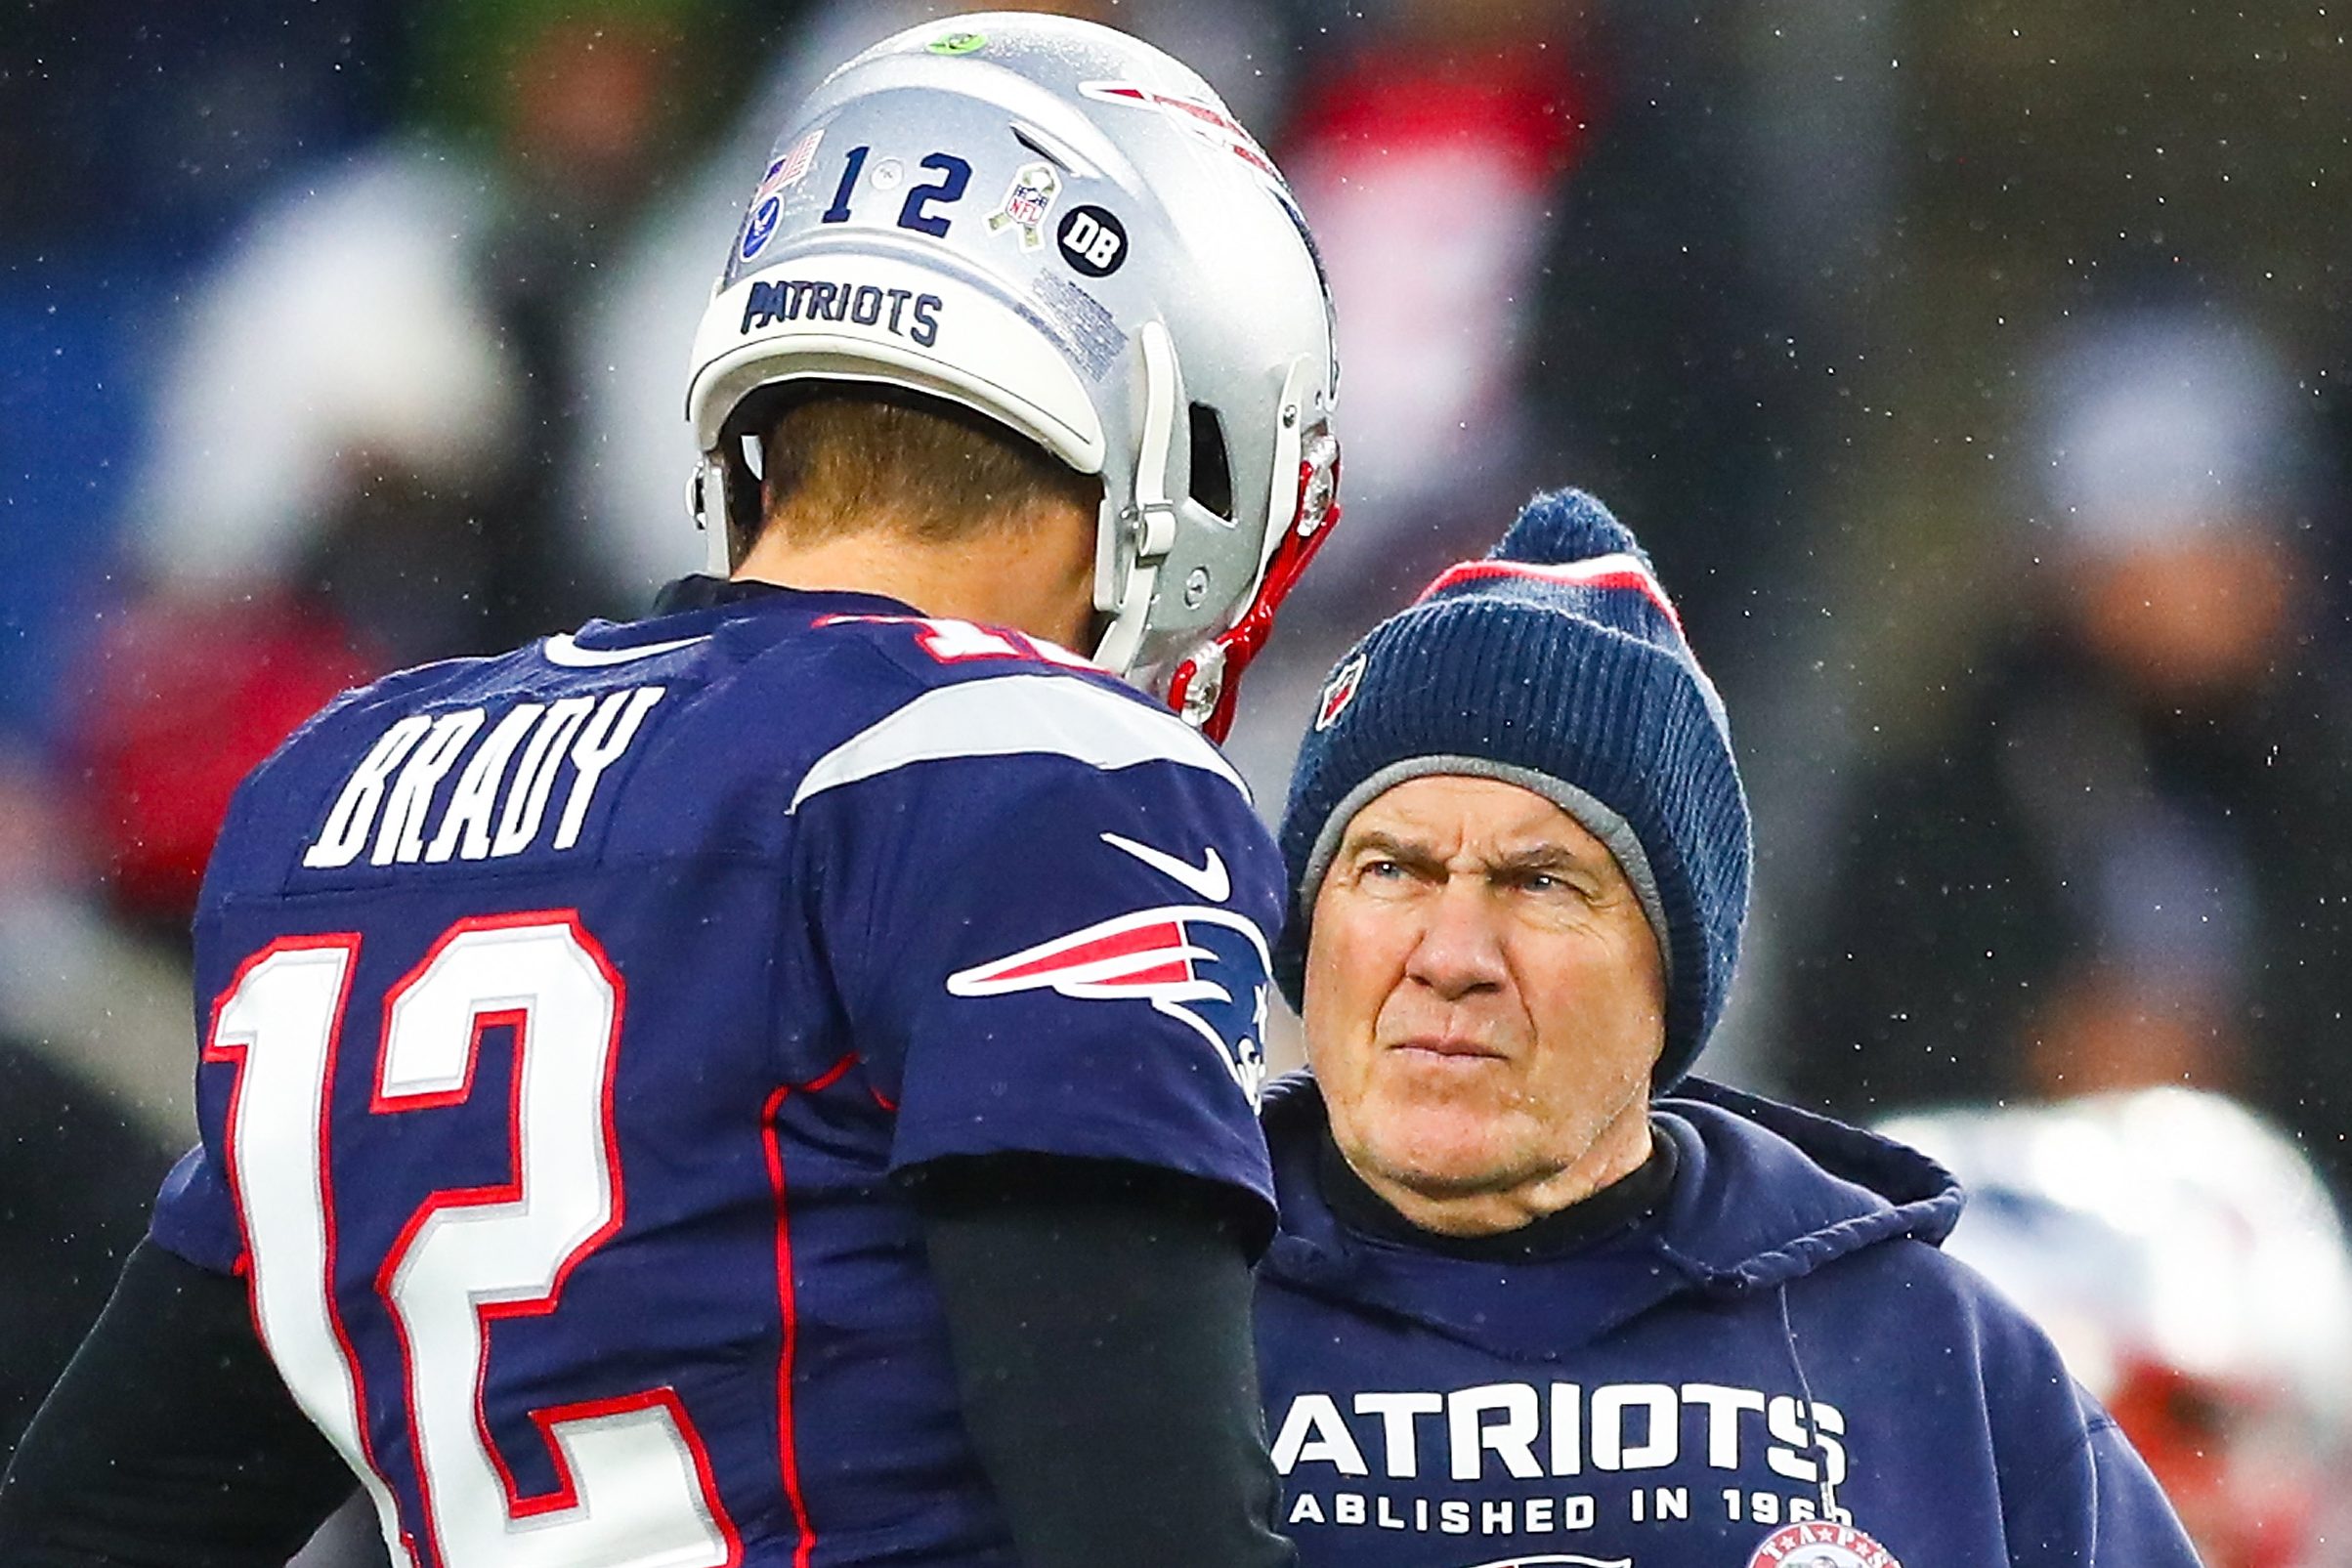 Tom Brady talks to Bill Belichick of the New England Patriots before a game with the Cowboys. In a statement about Brady's retirement, Belichick offered some subtle shade.